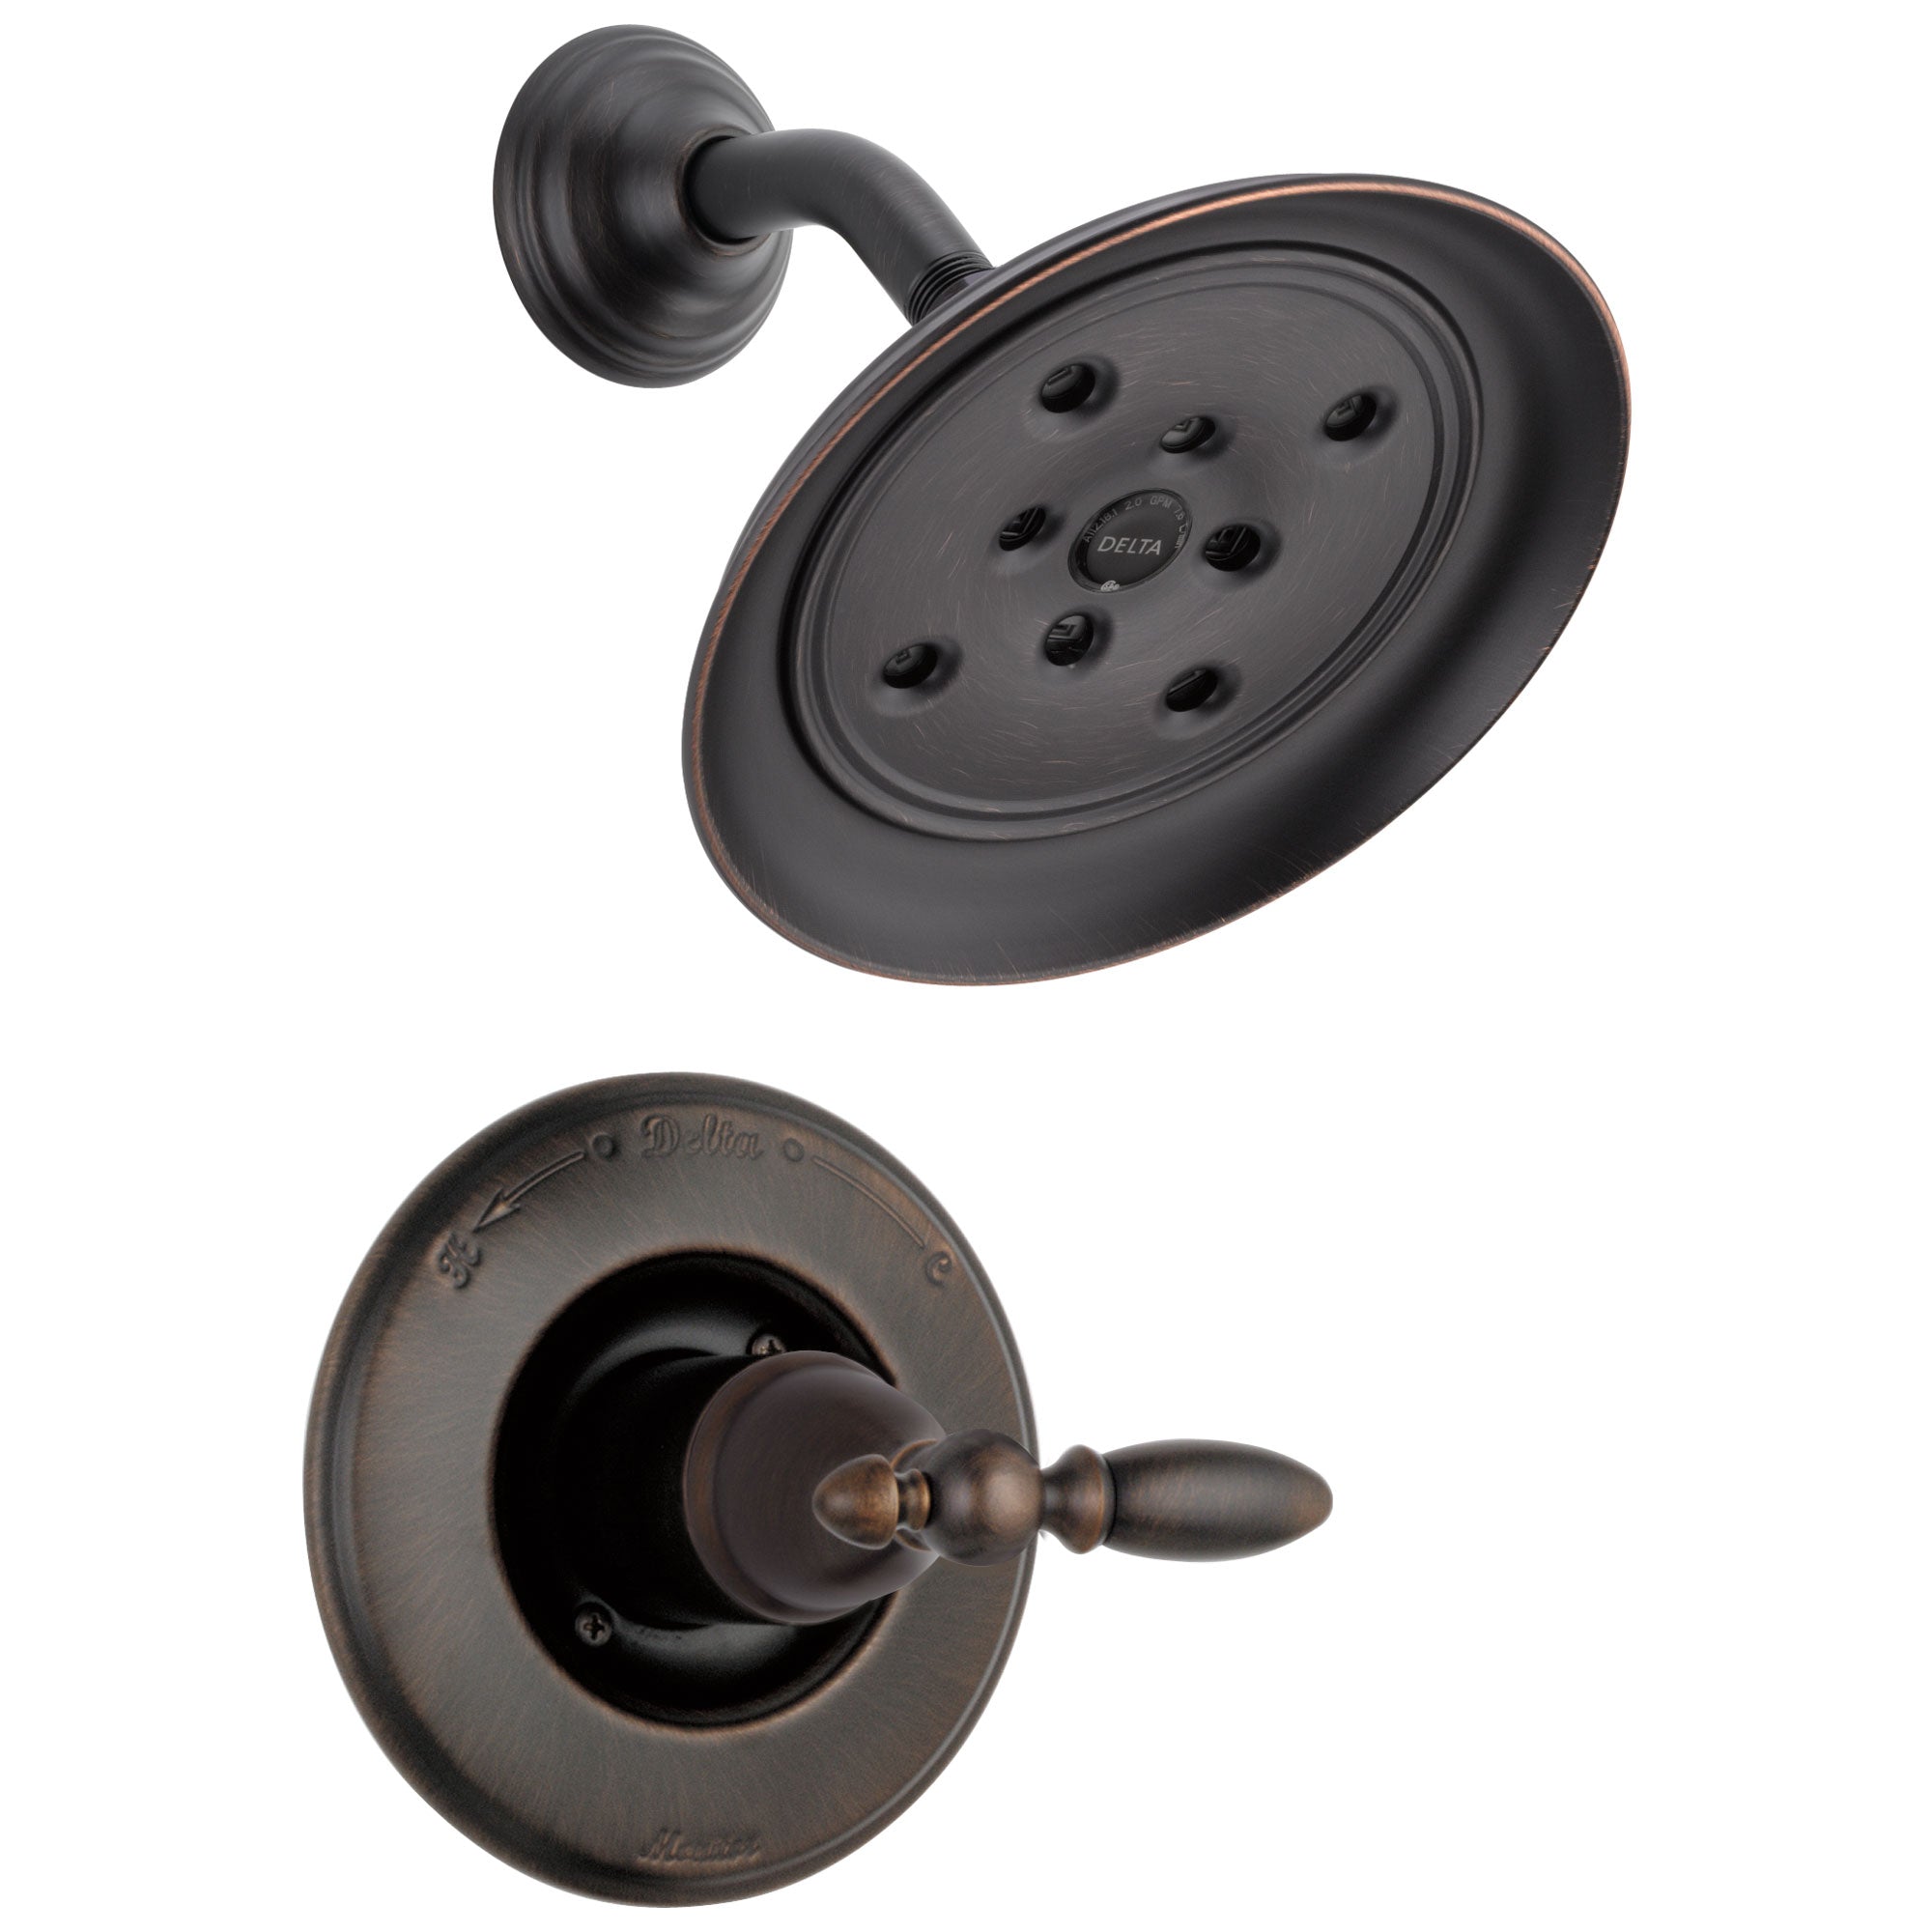 Delta Victorian Collection Venetian Bronze Traditional Style Monitor 14 Shower Faucet INCLUDES Single Lever Handle and Rough-Valve with Stops D1562V